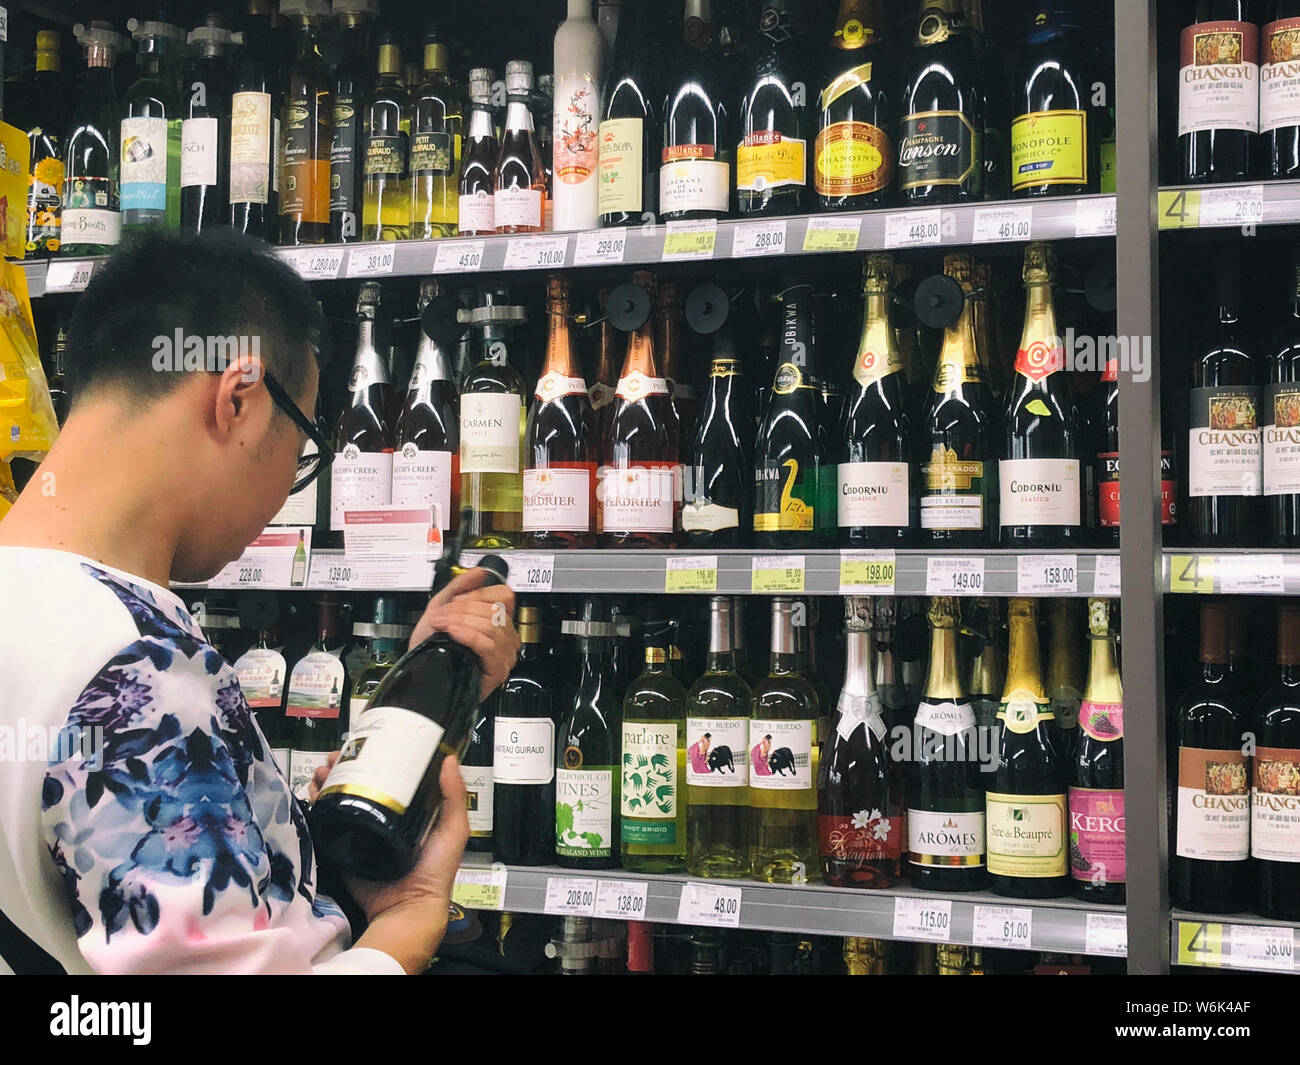 --FILE--A customer shops for wine at a supermarket in Shanghai, China, 11 November 2017. China is likely to displace Britain as the world's second lar Stock Photo